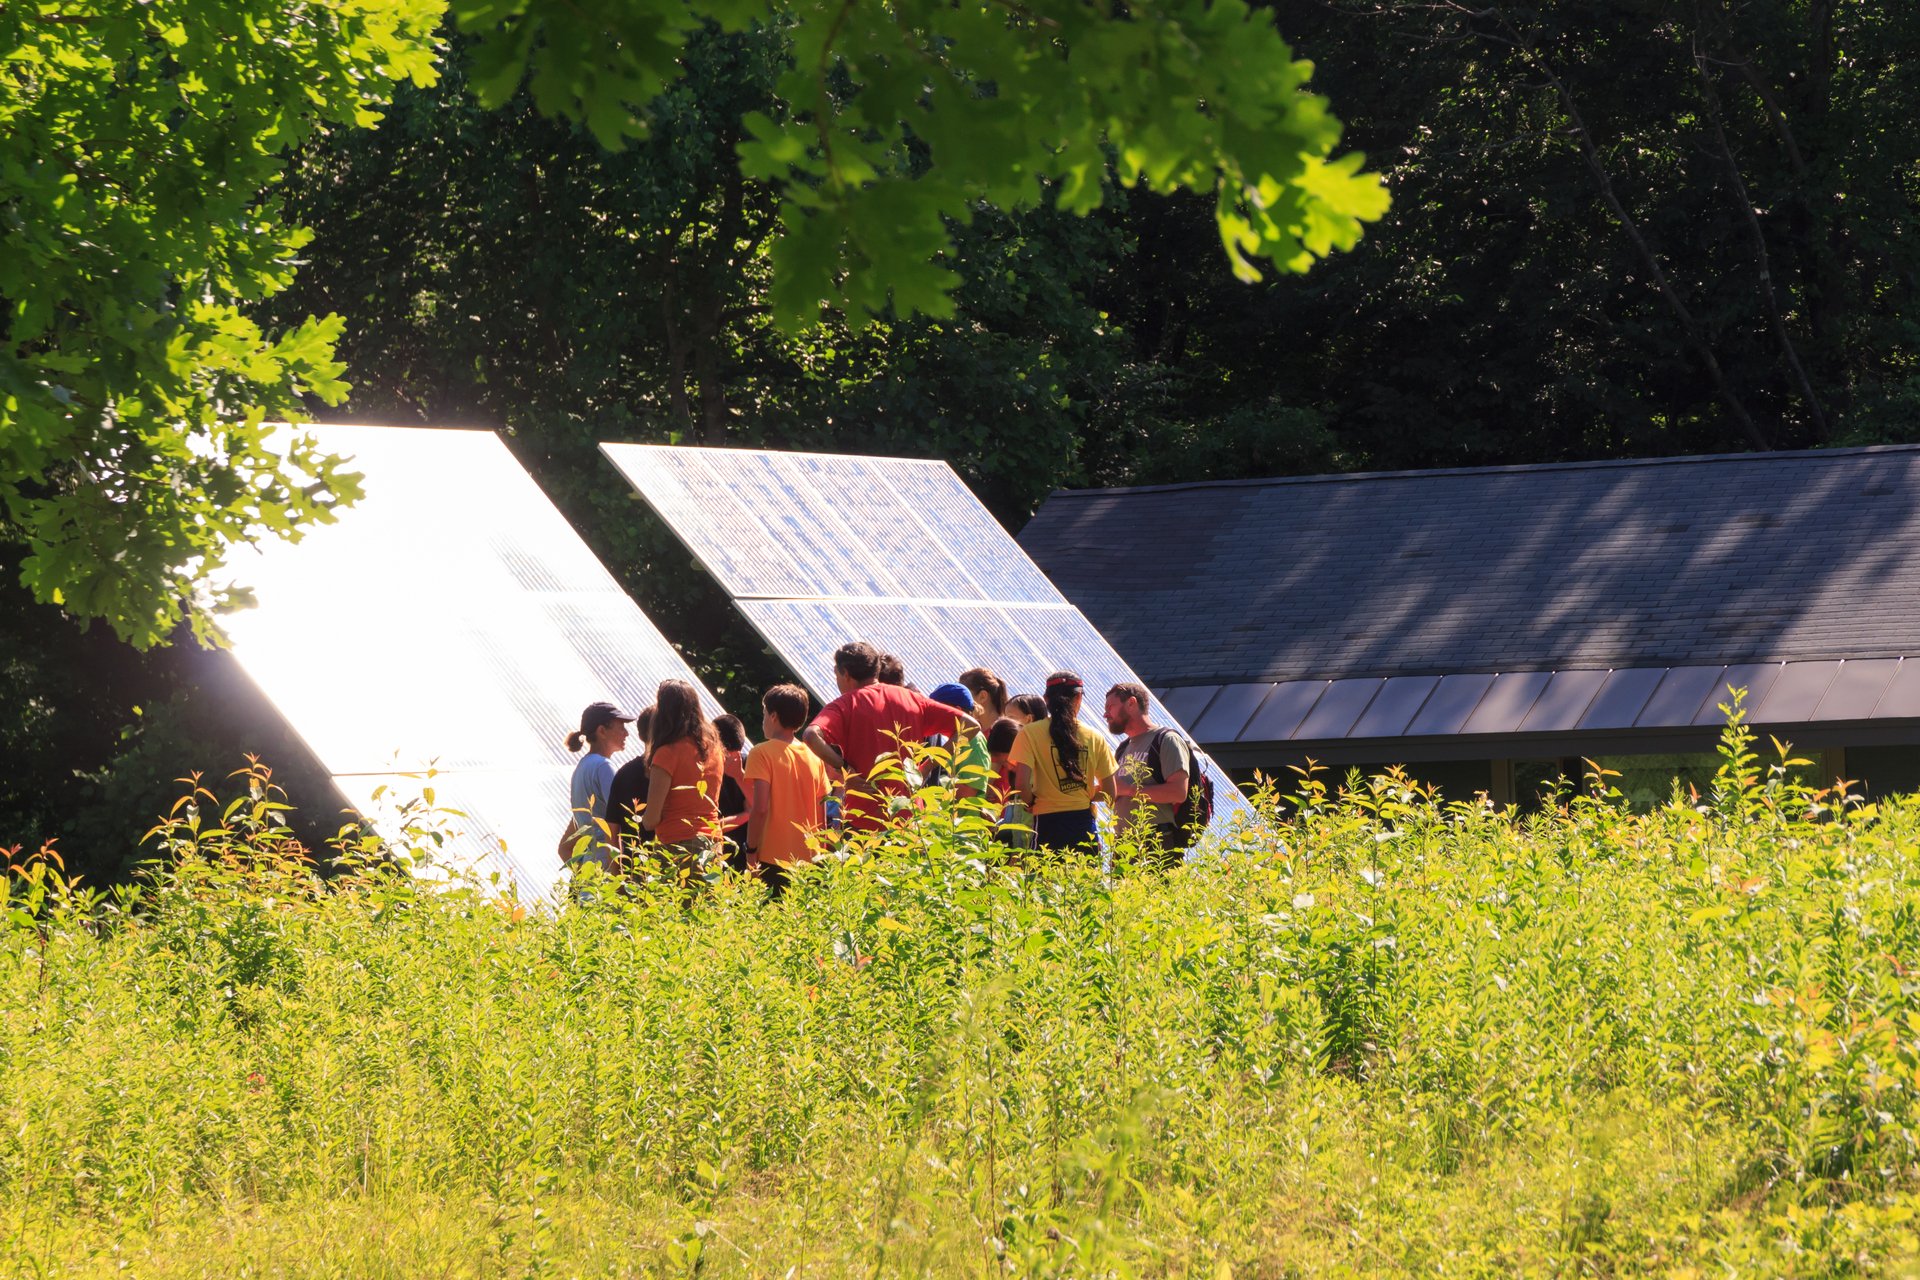 Group of people in front of solar panels